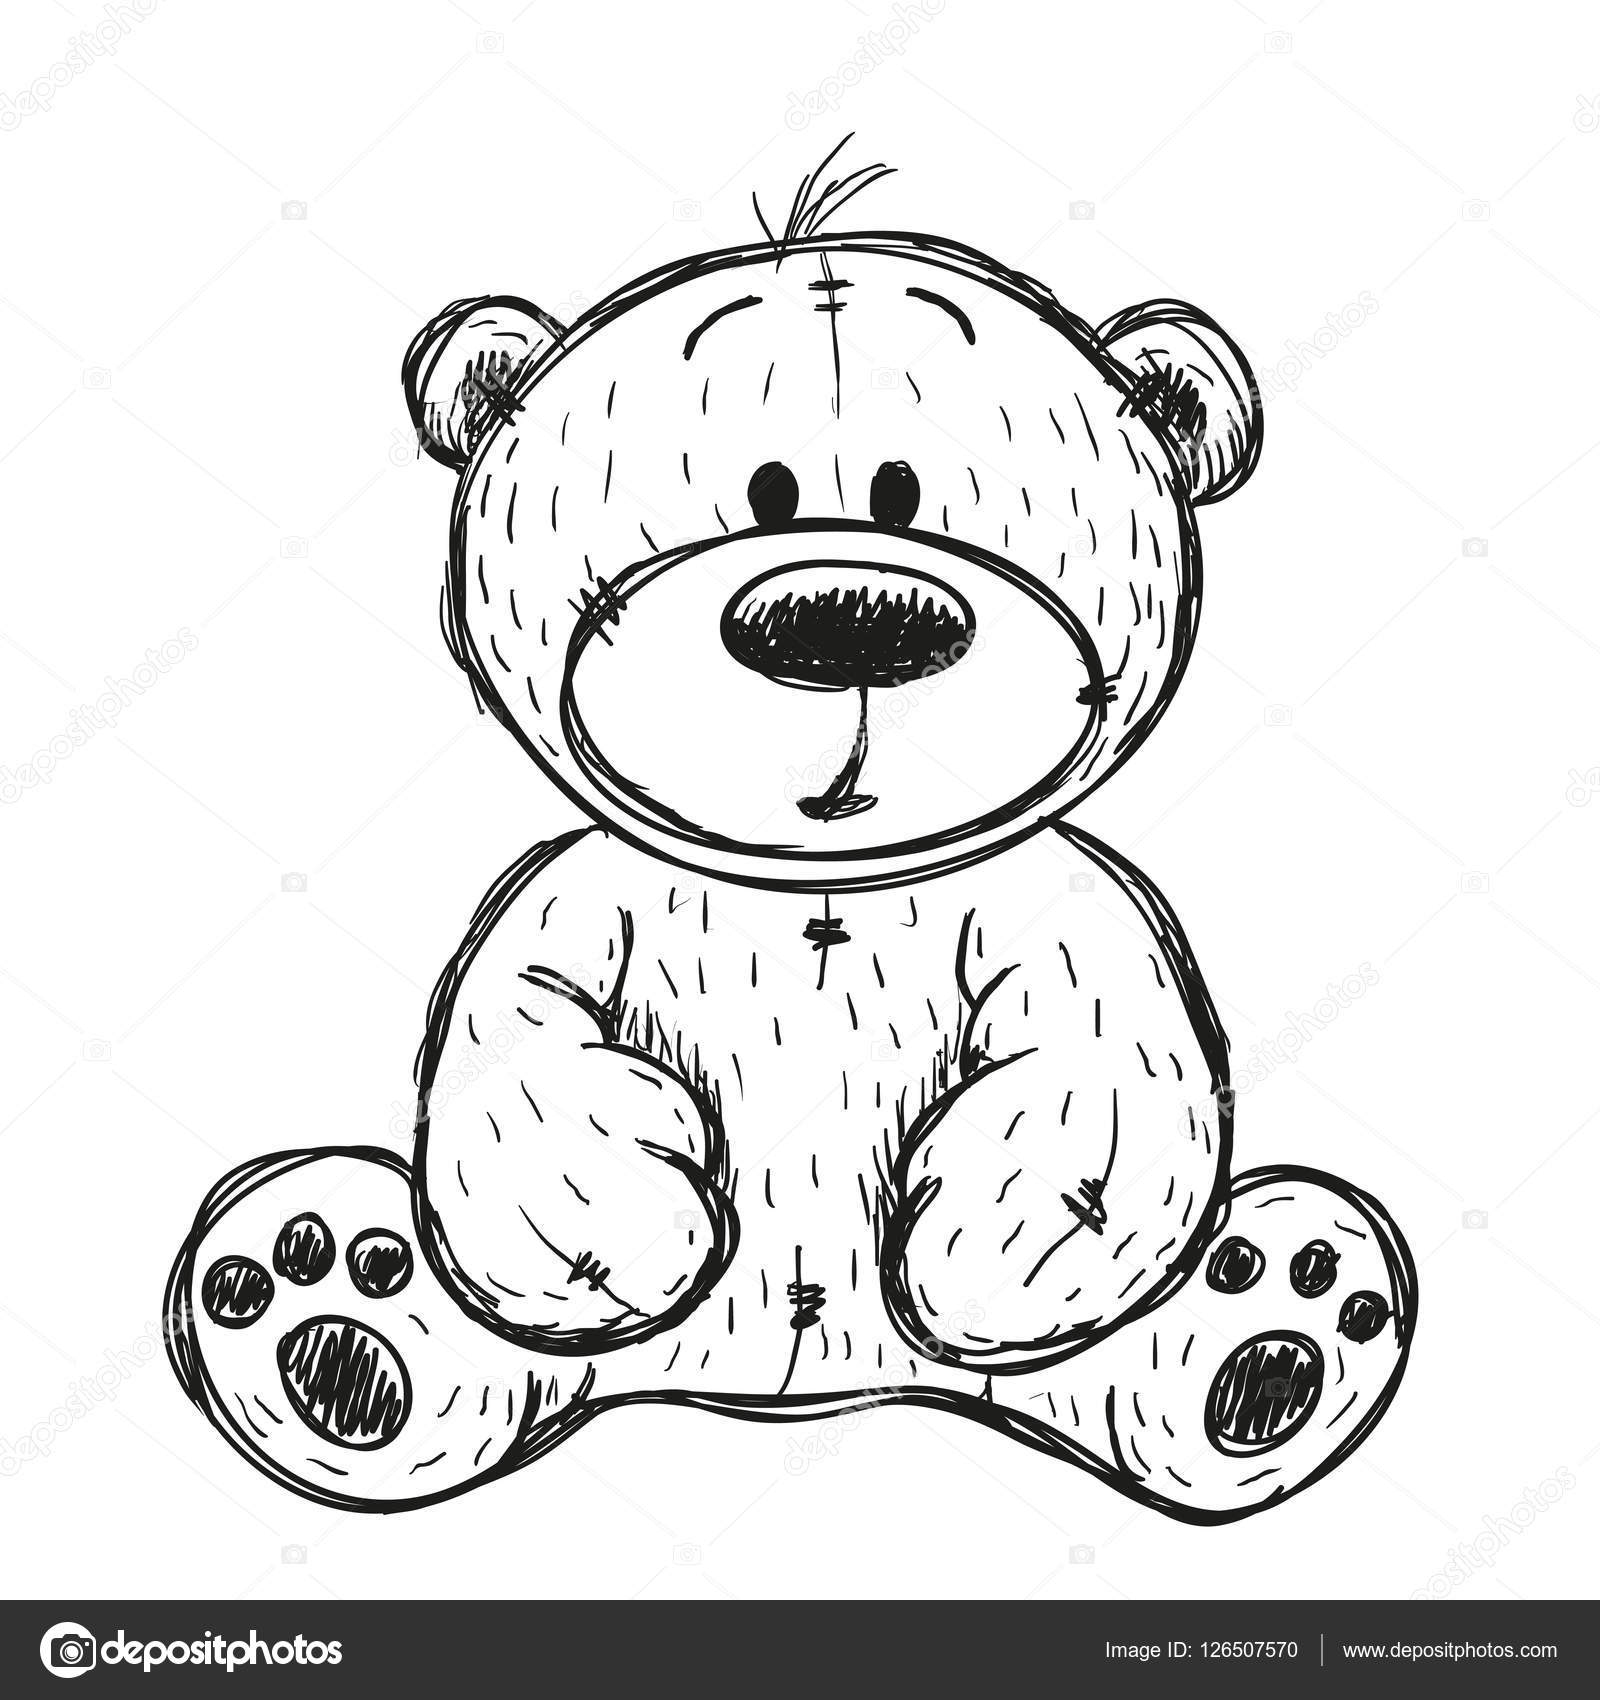 How to Draw a Teddy Bear with a Heart - Really Easy Drawing Tutorial-saigonsouth.com.vn